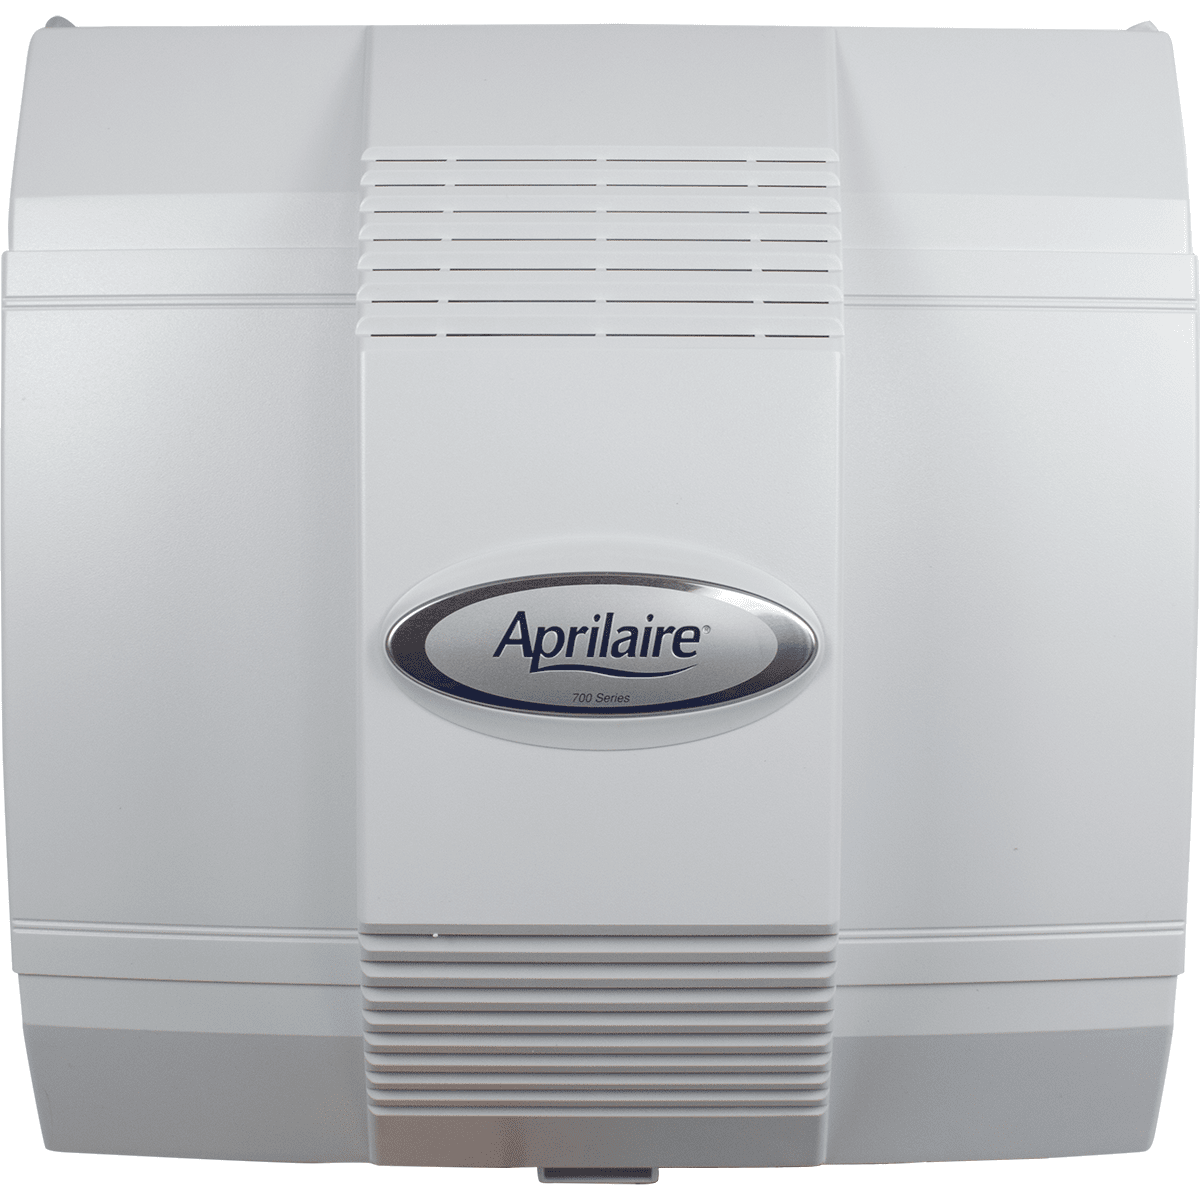 Aprilaire Model 700 High-capacity Whole House Humidifiers